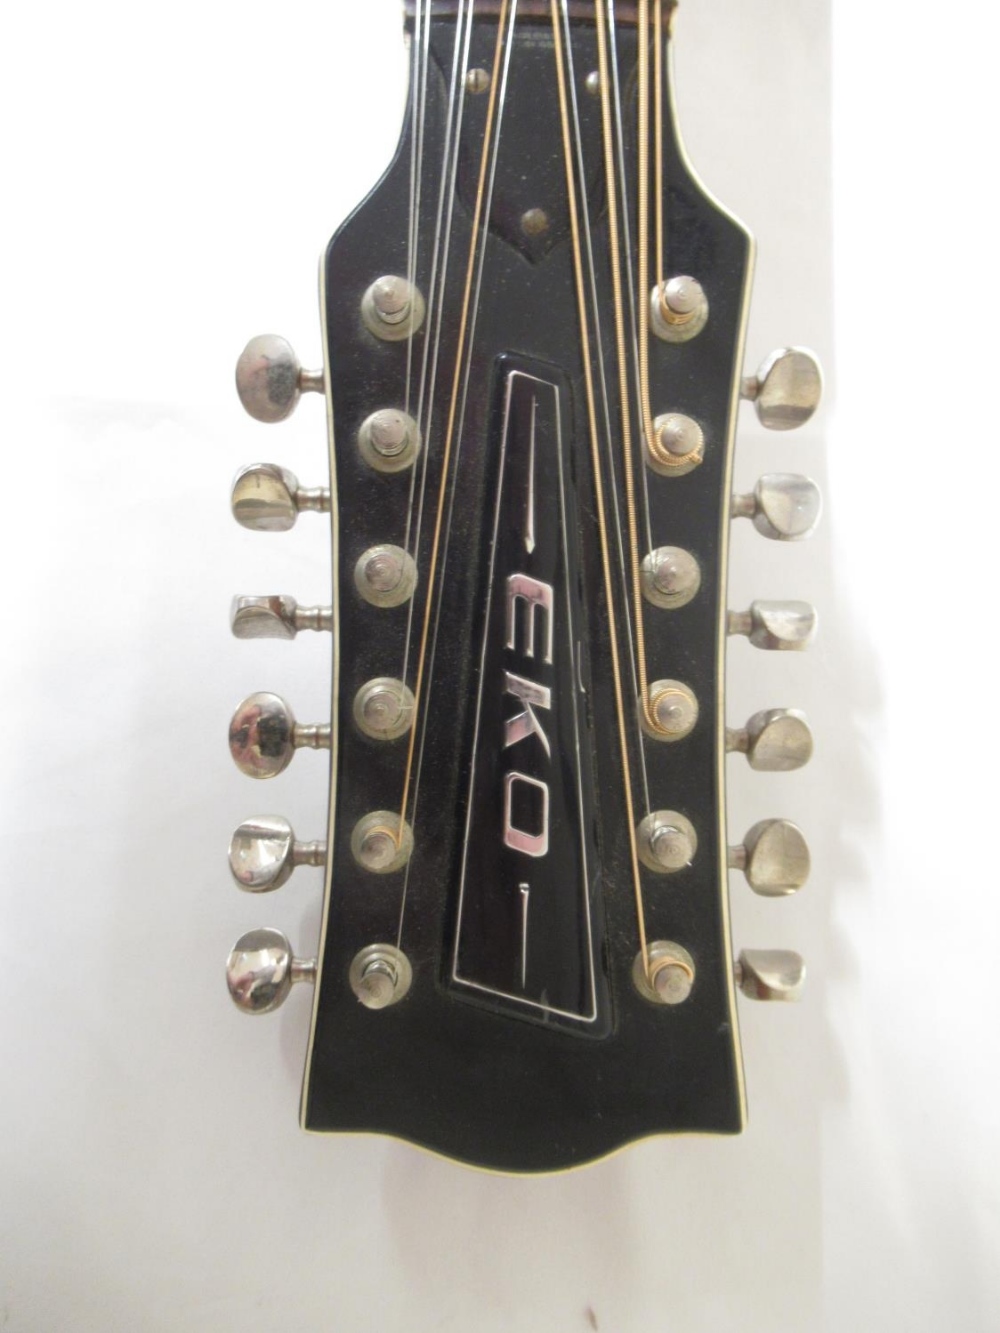 Eko Model no. J. 56/1 12 string acoustic electric guitar, with a Madarozzo carry bag (Victor Brox - Image 2 of 10